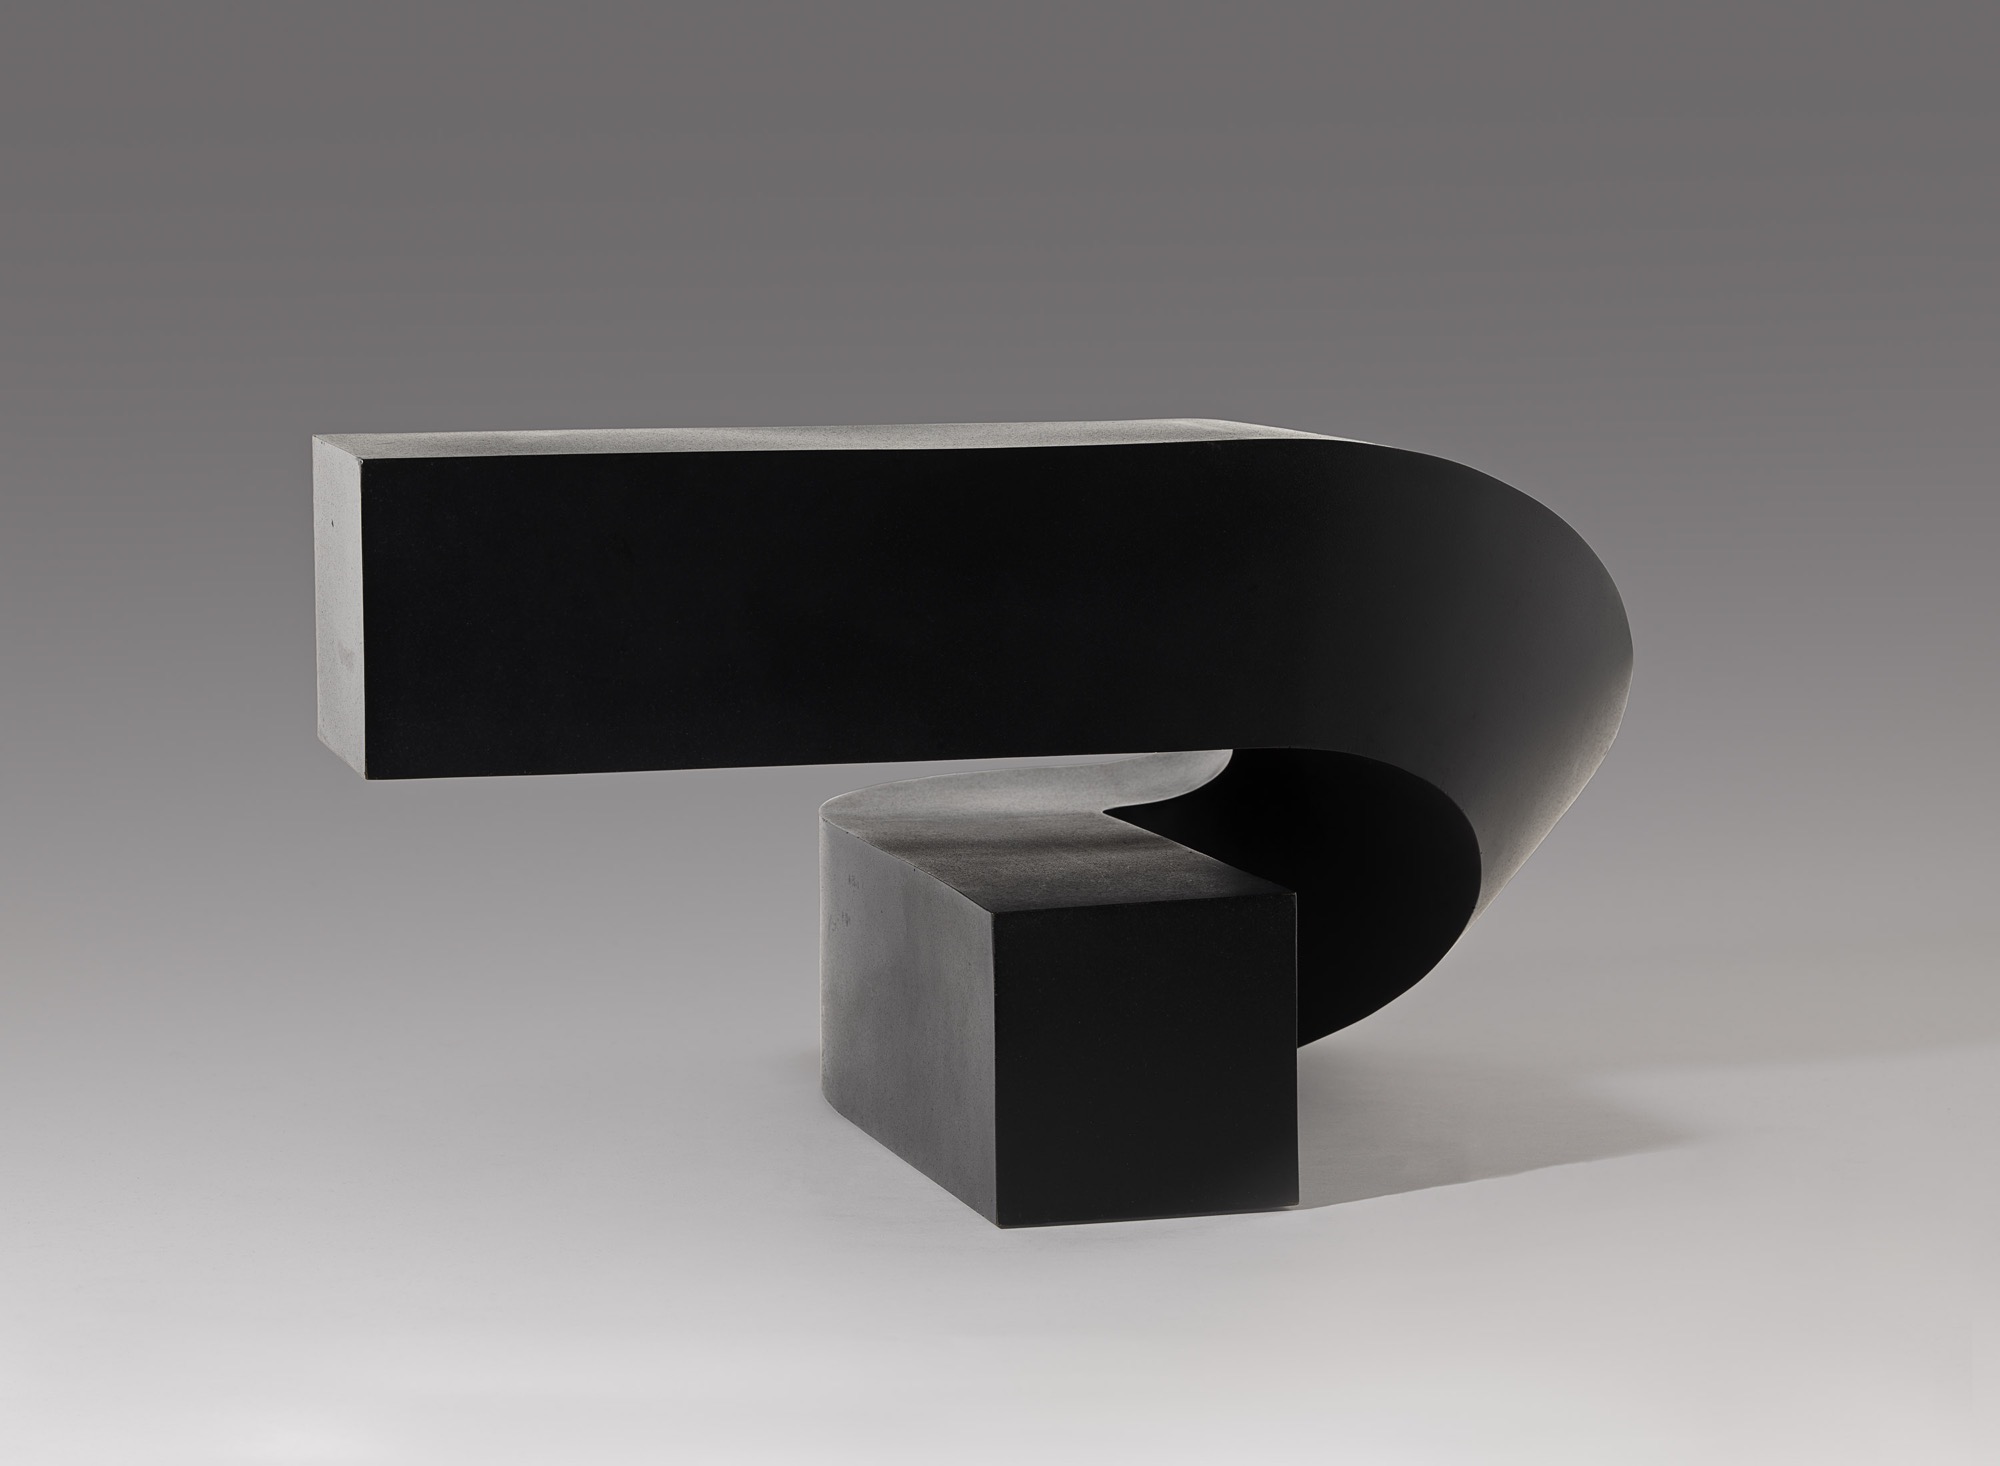 Clement Meadmore, <em>Up and over</em>, 1967, painted steel 31.0 x 40.7 x 60.1 cm. National Gallery of Australia, Canberra. Purchased, 1969.